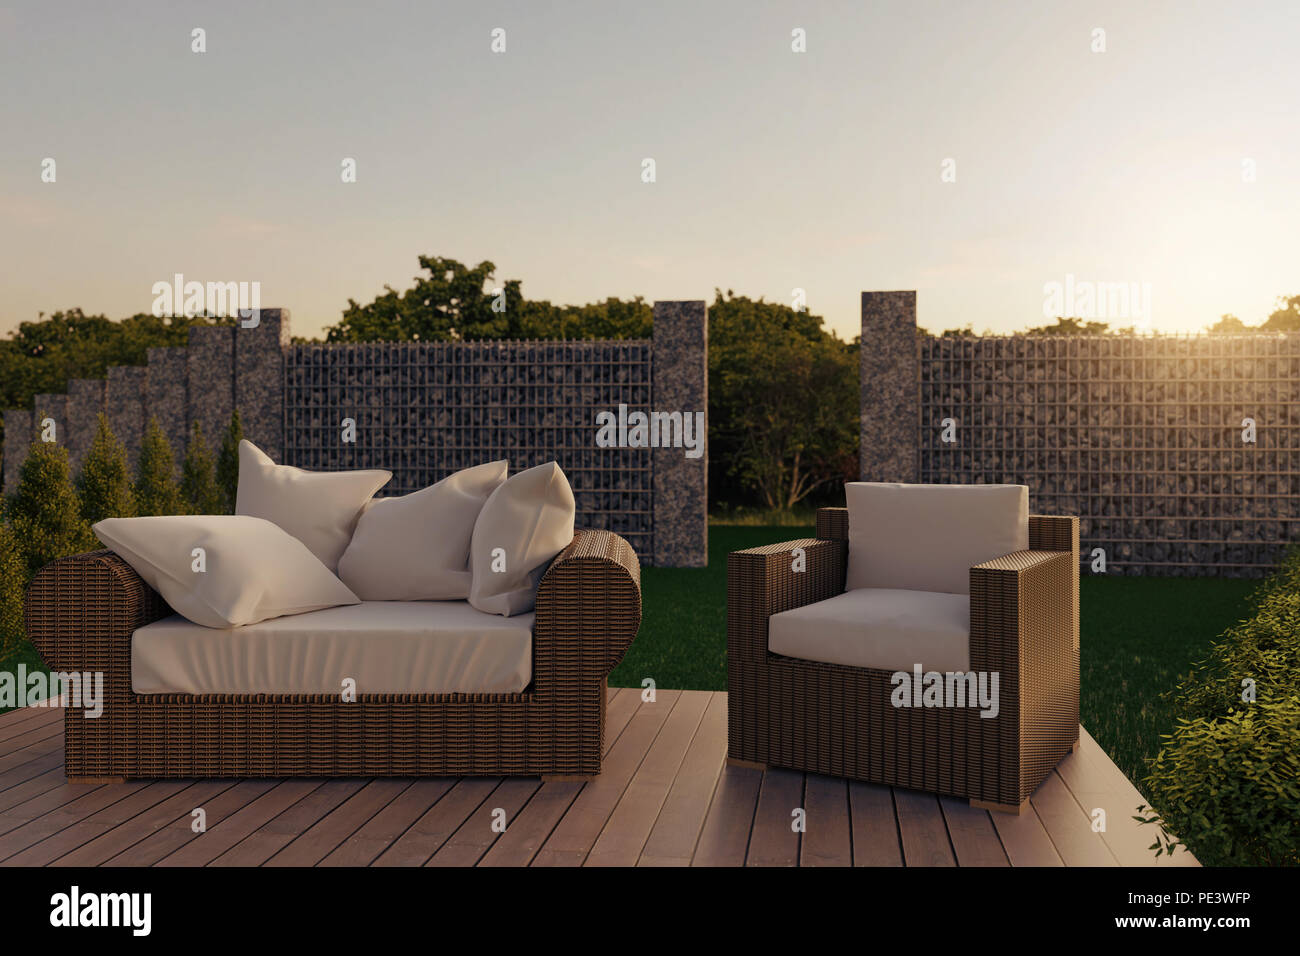 3d rendering of rattan garden furniture on wooden patio at garden in the evening sunshine Stock Photo